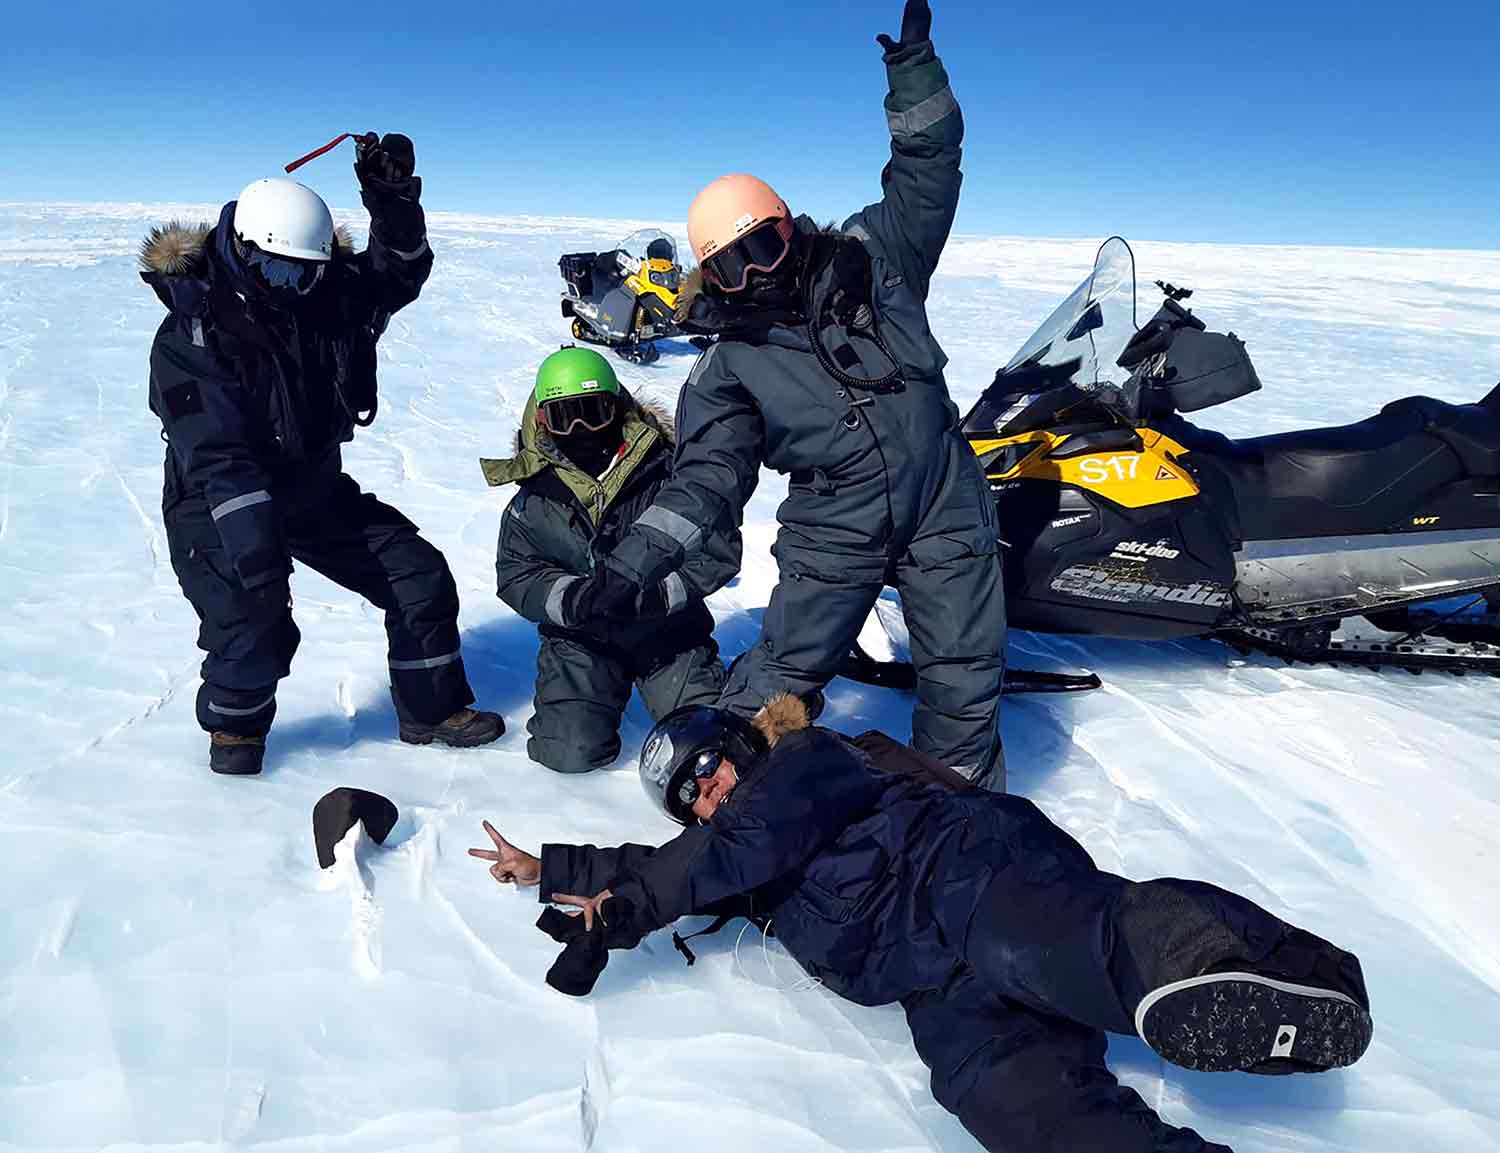 Four people in snowsuits, helmets, and sunglasses on an icy landscape gather around a meteorite.